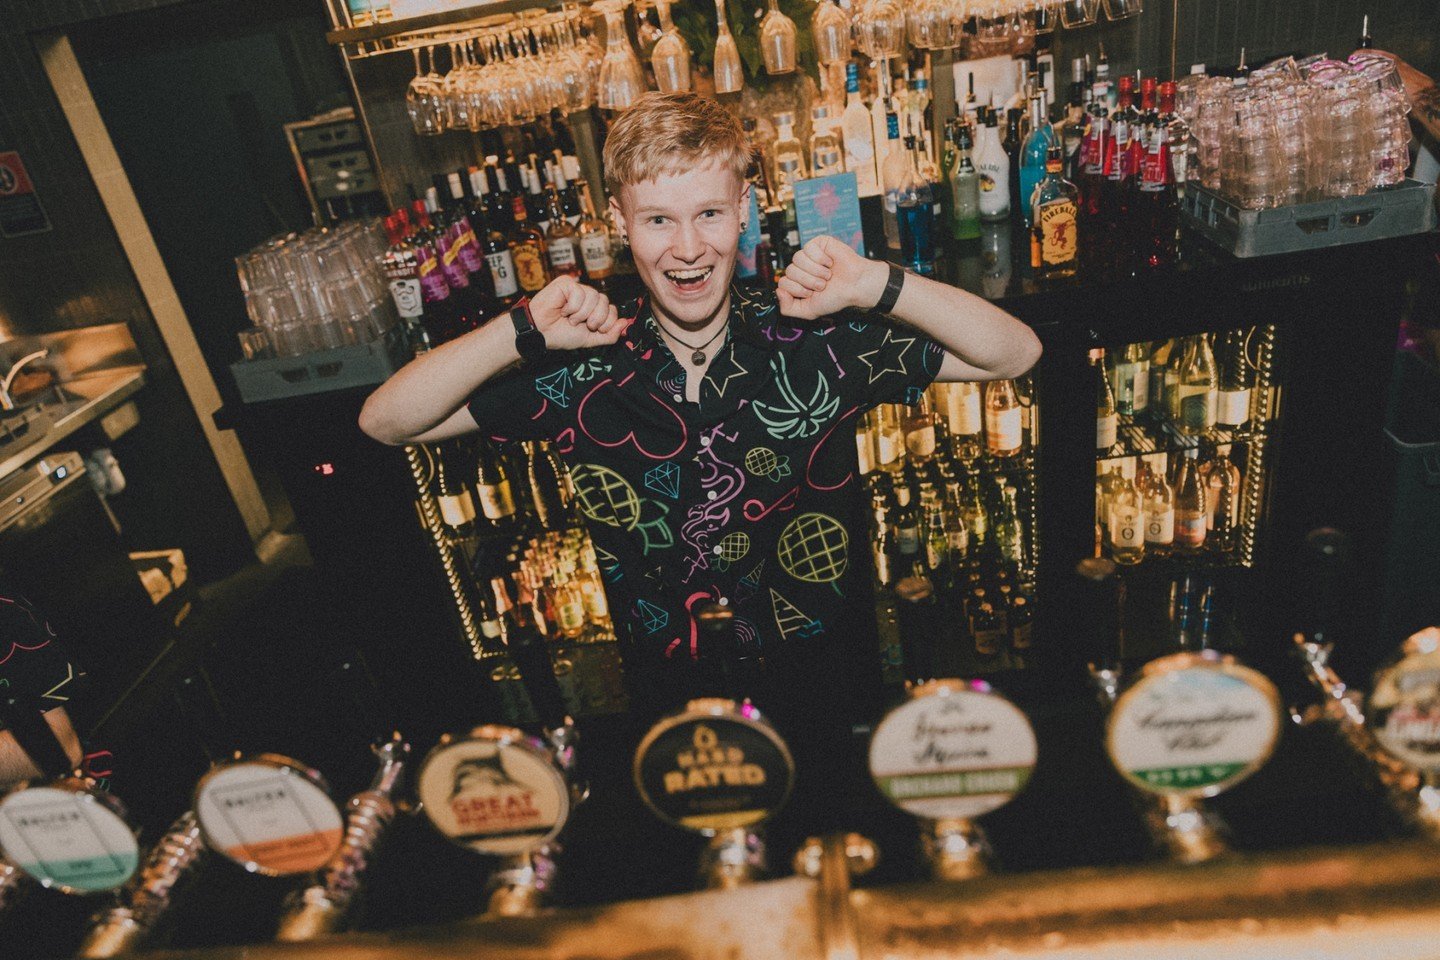 Calling ALL cool parents and dance floor heroes! 🦩✨ School's nearly back in session, and we're ready to celebrate with you! 

Swing by Pub Troppo from 8pm tonight, we're spinning retro hits in the beer garden and singing Karaoke in The Saloon 'til l